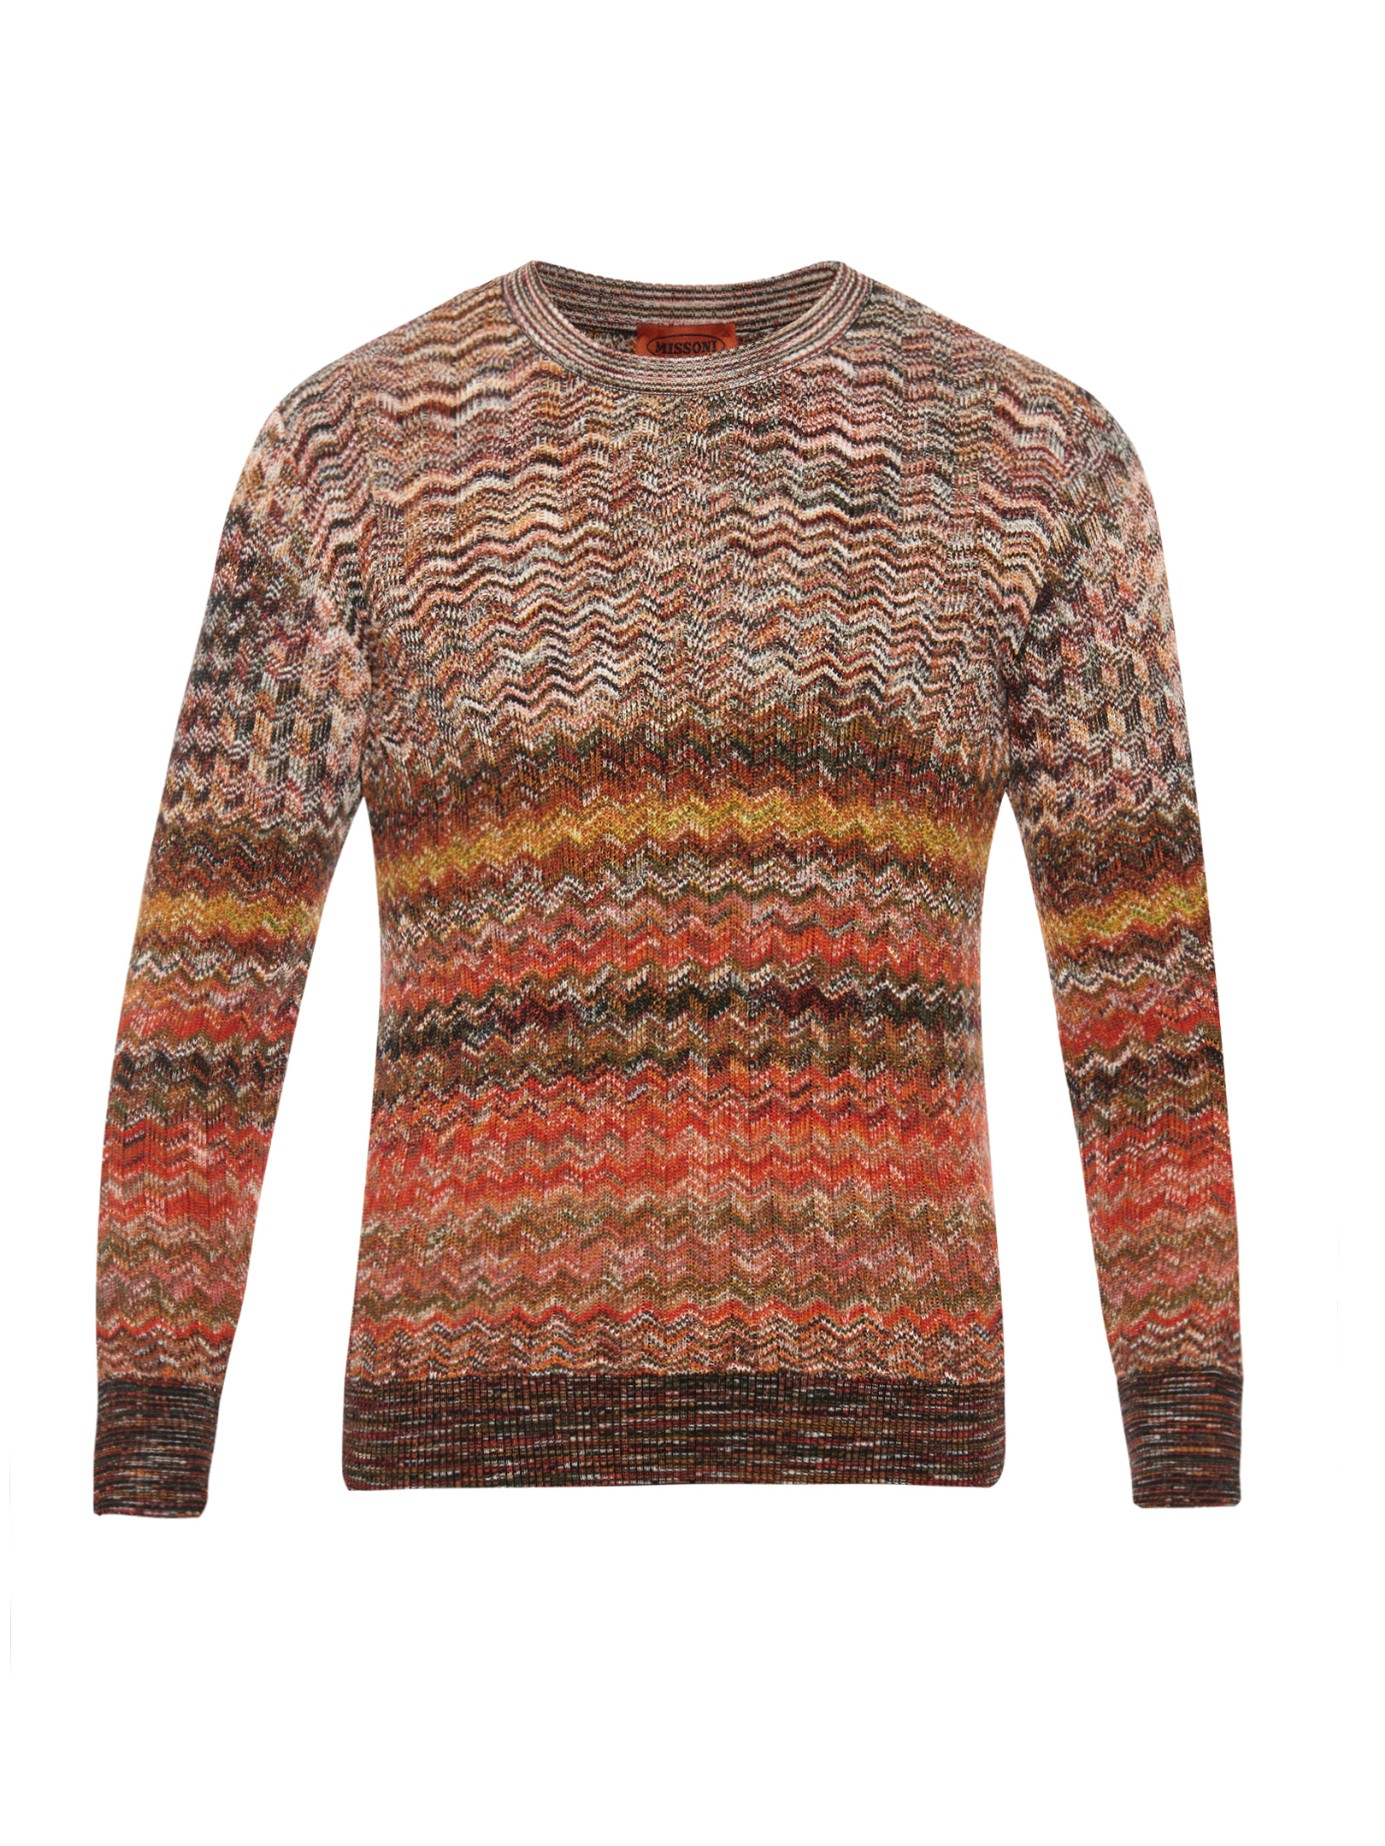 Lyst - Missoni Sweater in Brown for Men